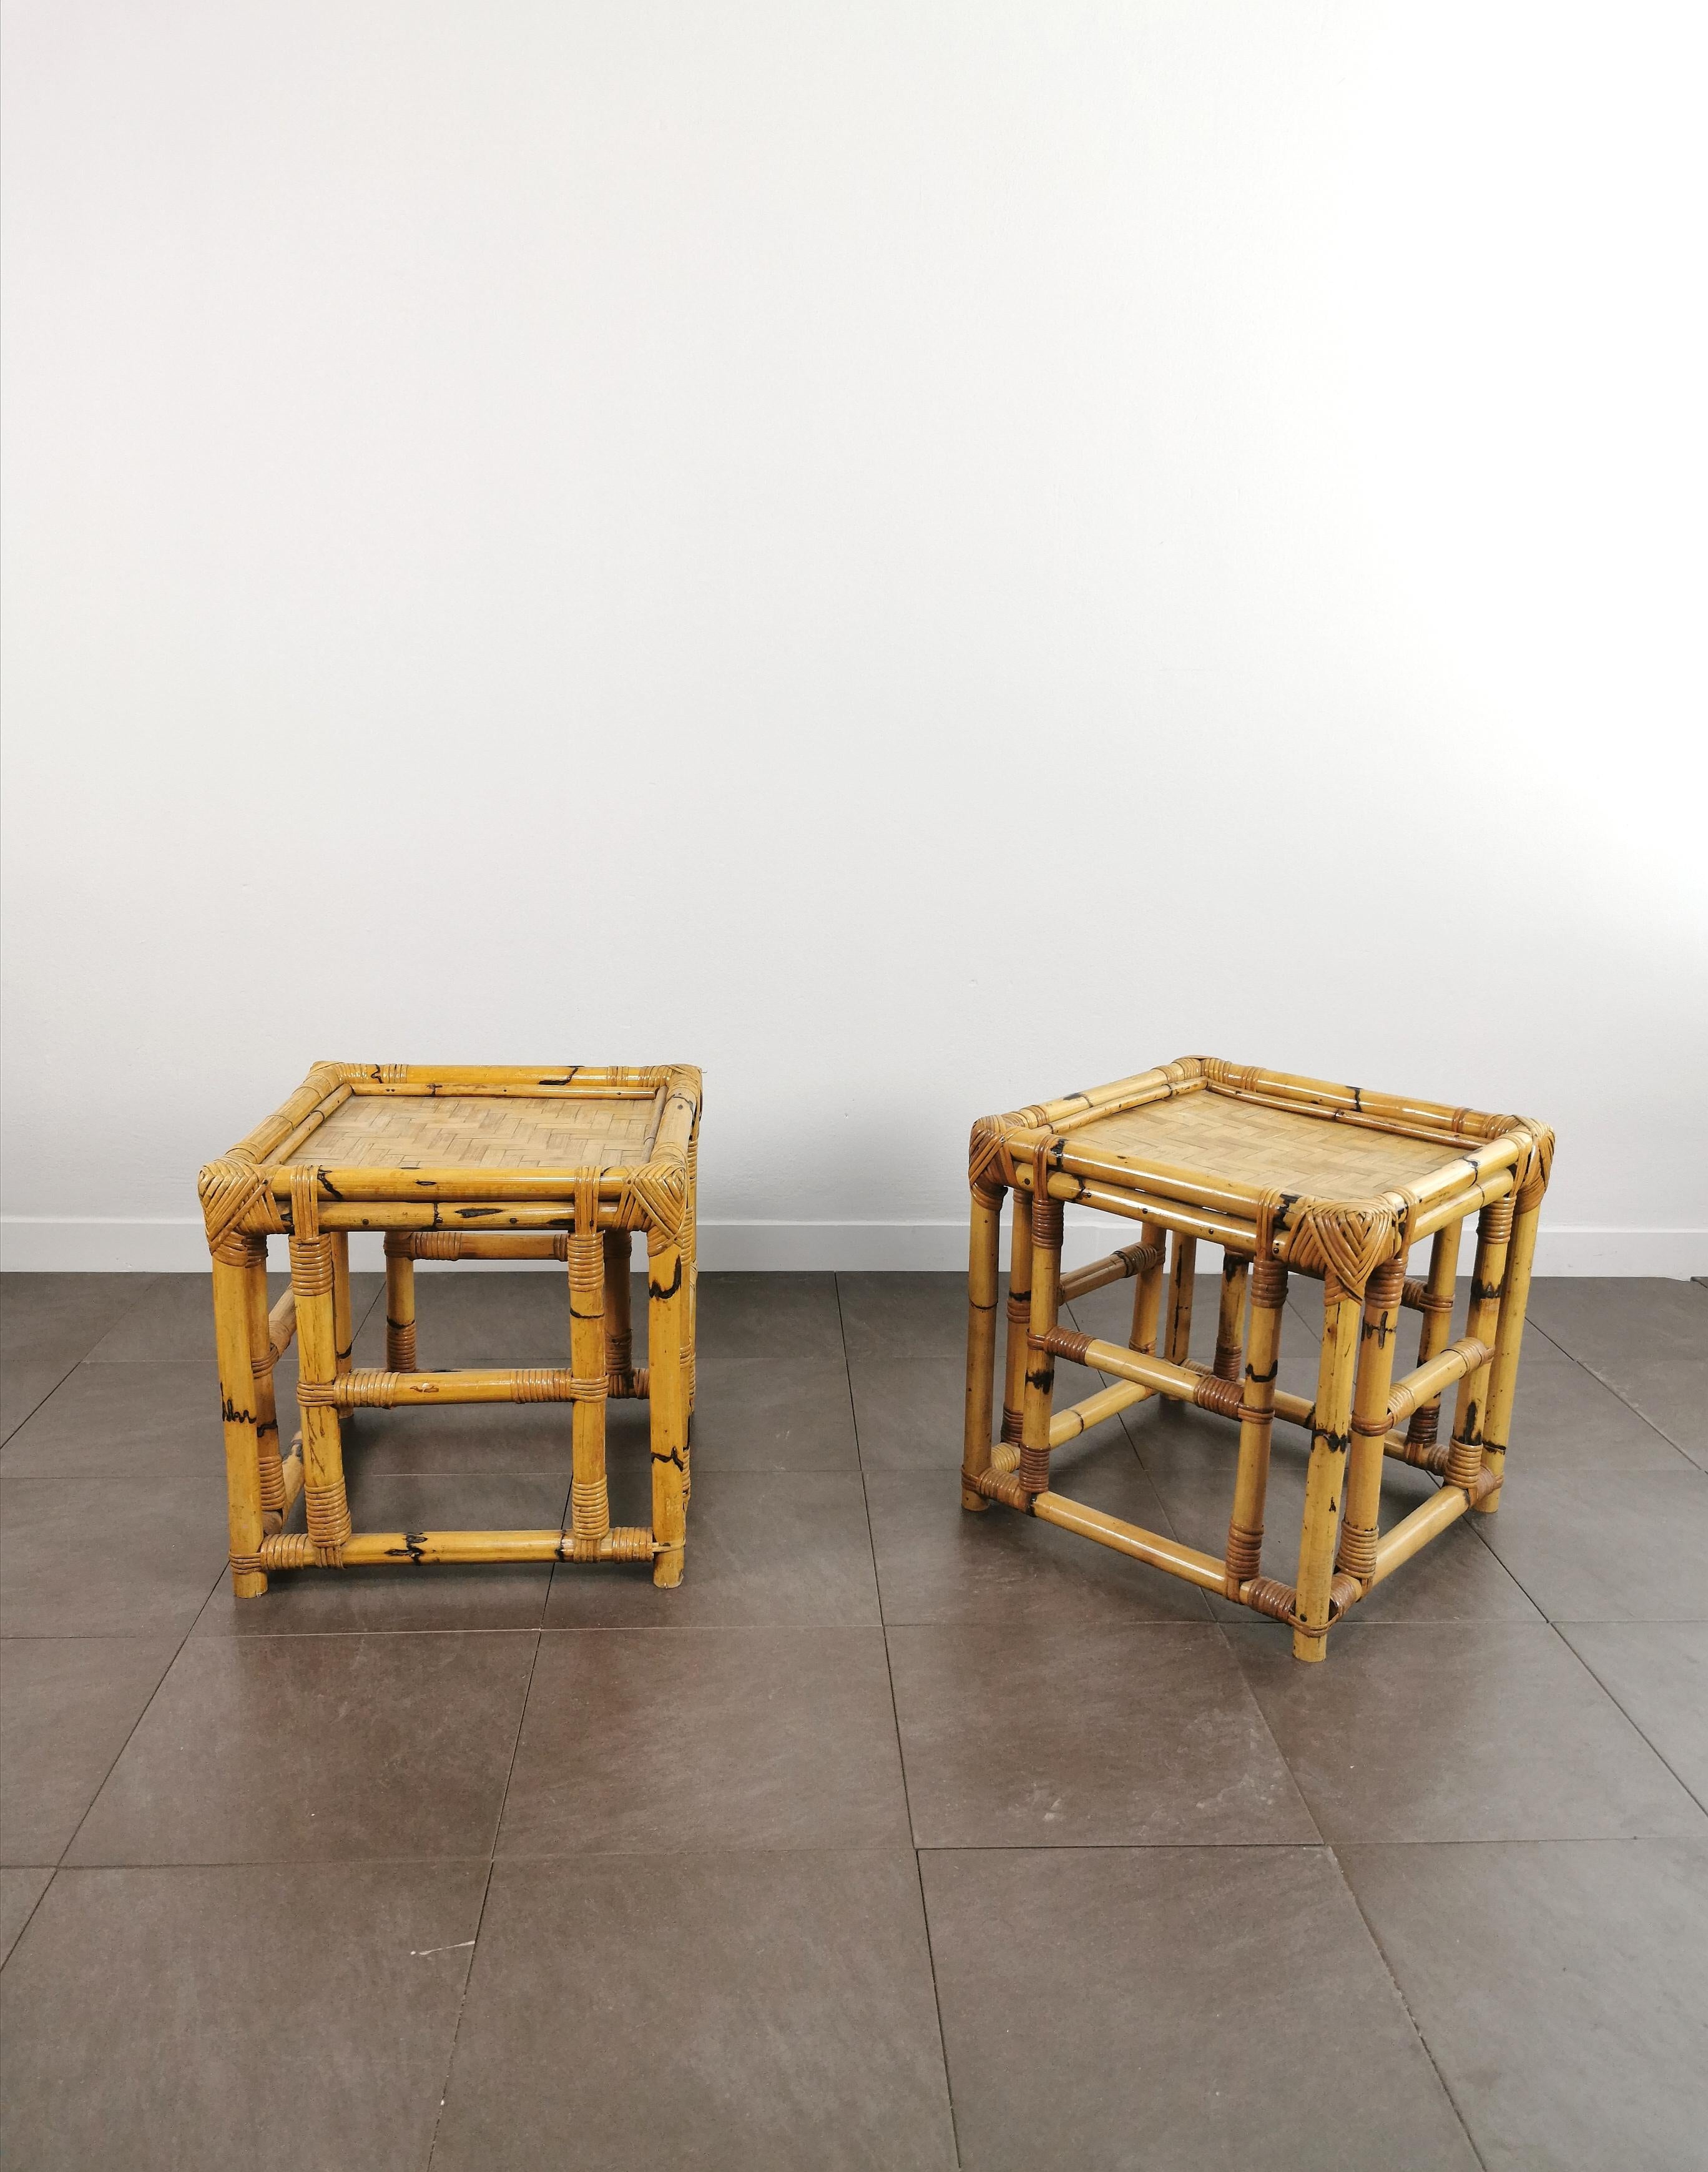 Woven Pair of Coffee Tables Bamboo Cubic Vivai del Sud Midcentury Modern Italy 1970s  For Sale